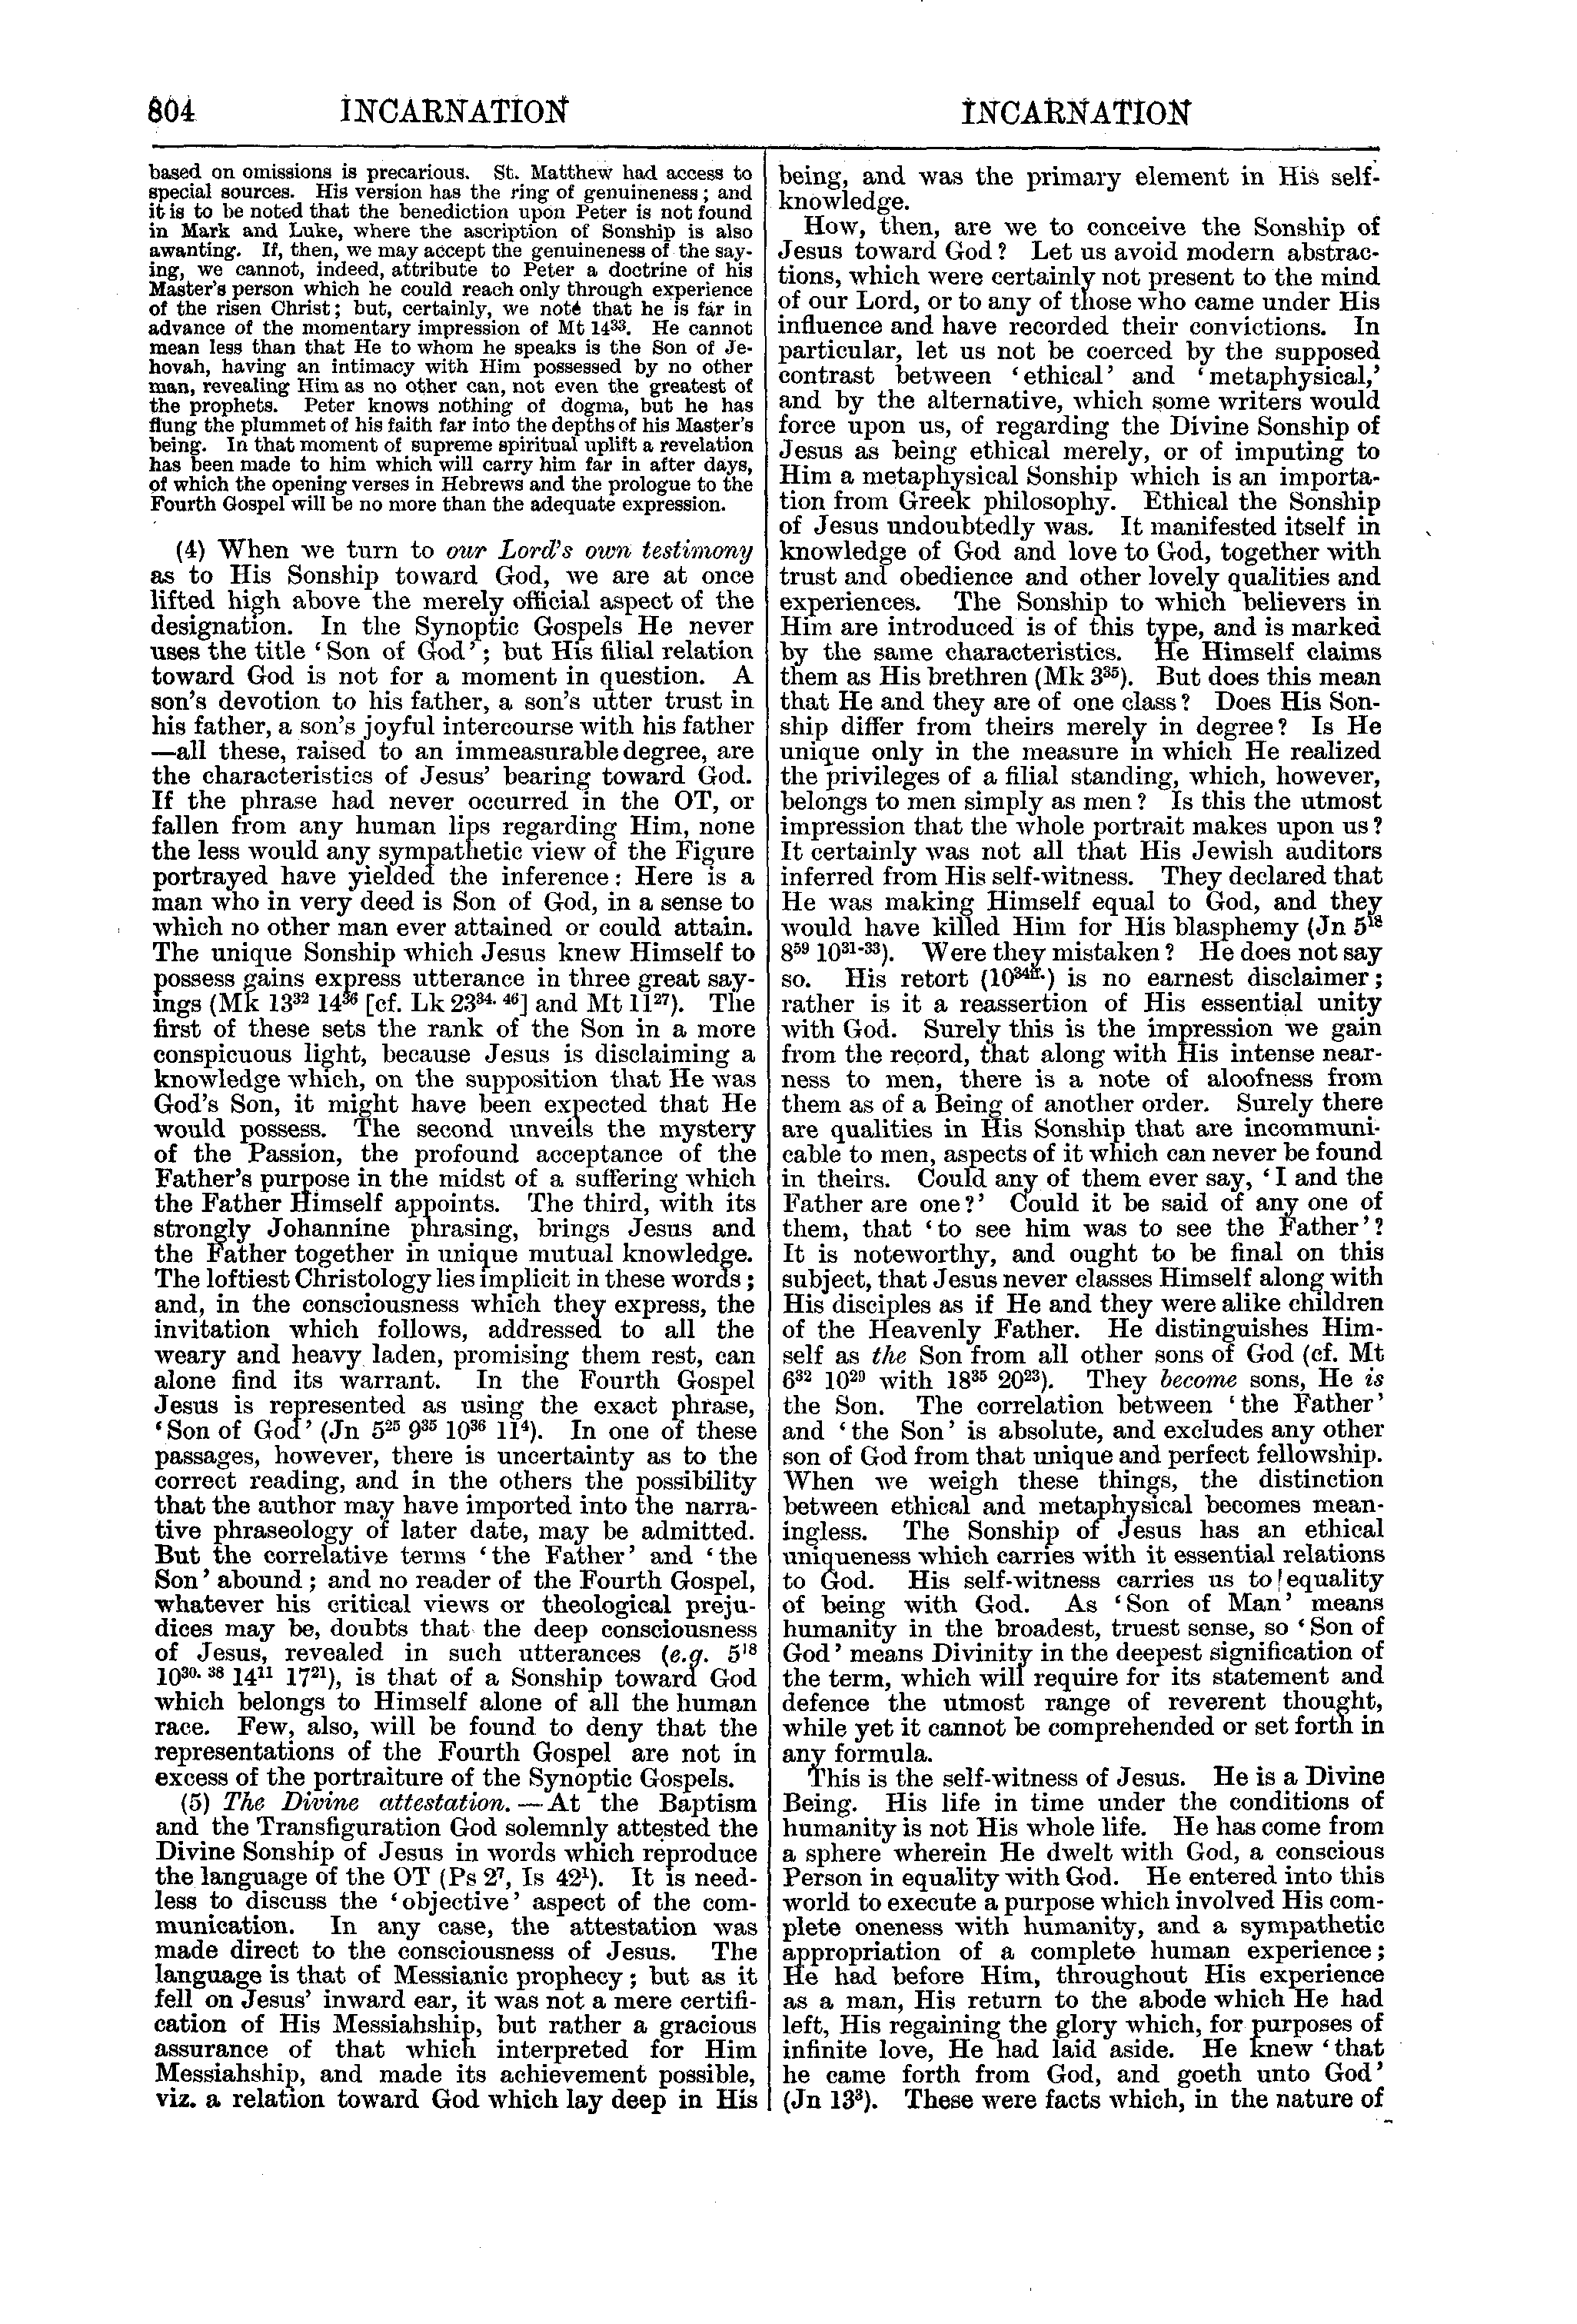 Image of page 804